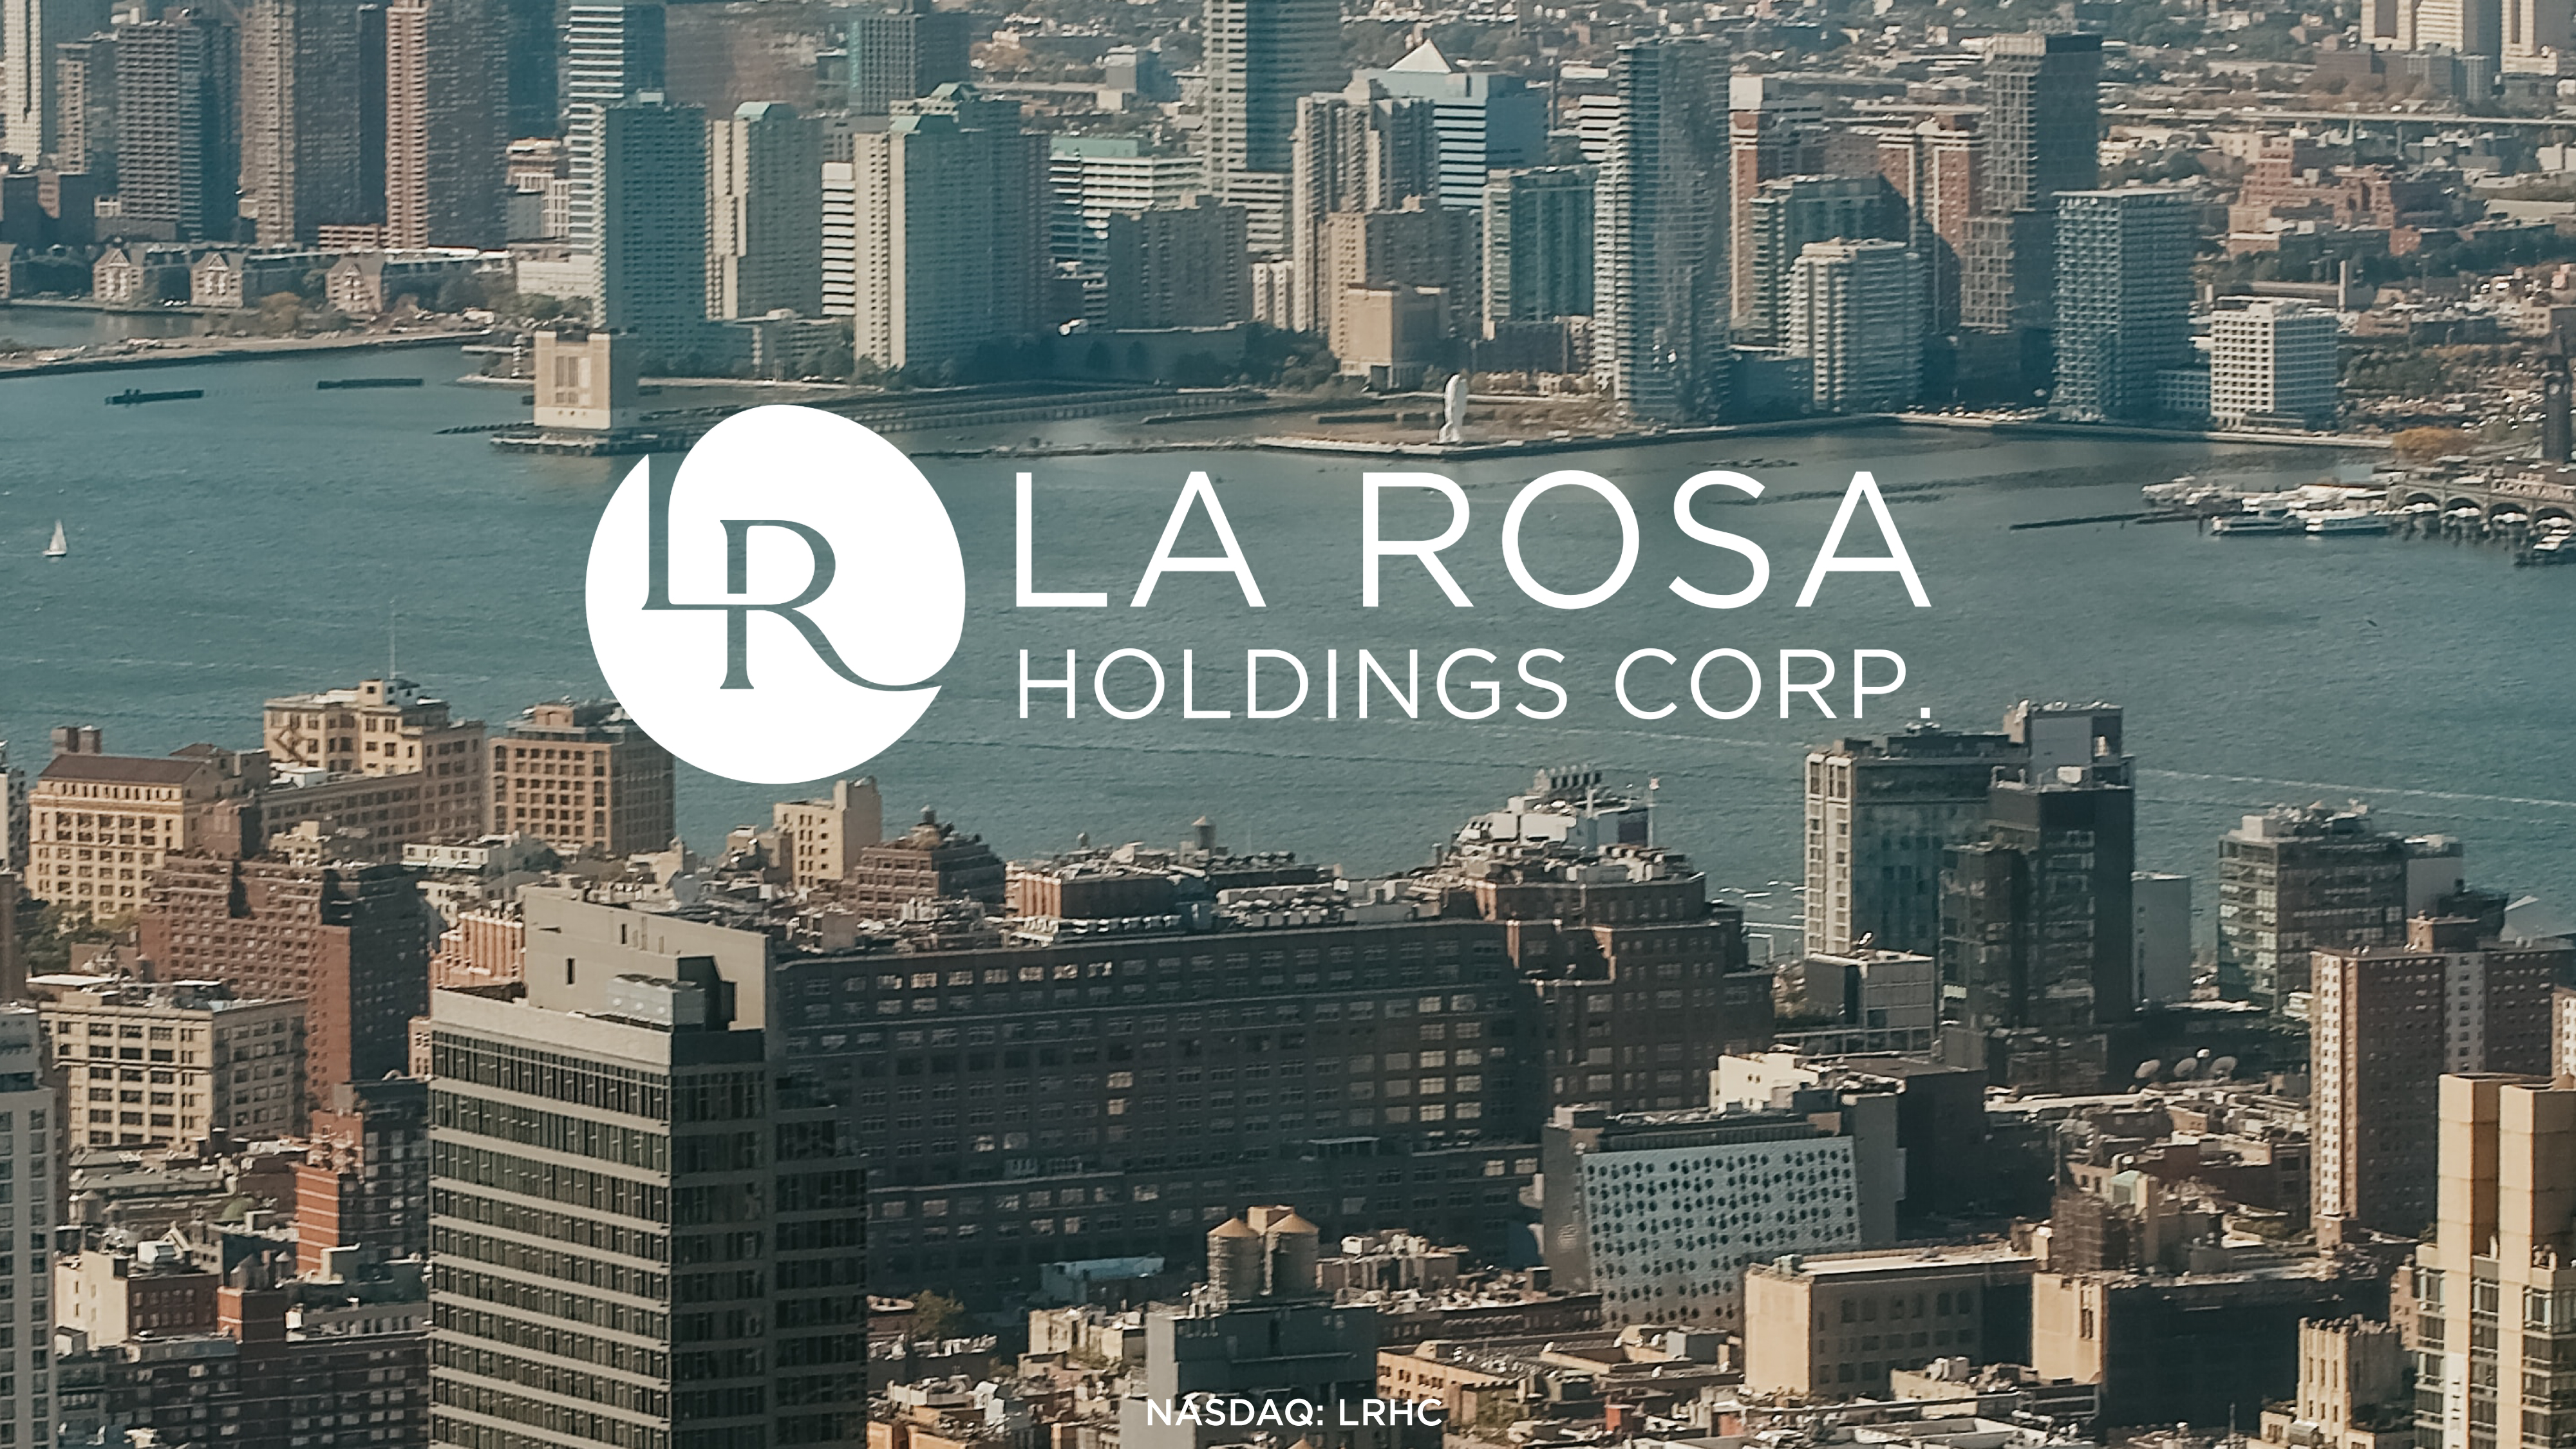 La Rosa Holdings Is Acquiring Assets, Launching AI-Empowered Real Estate Technology, And Positioning For Breakout 2024 Growth ($LRHC)